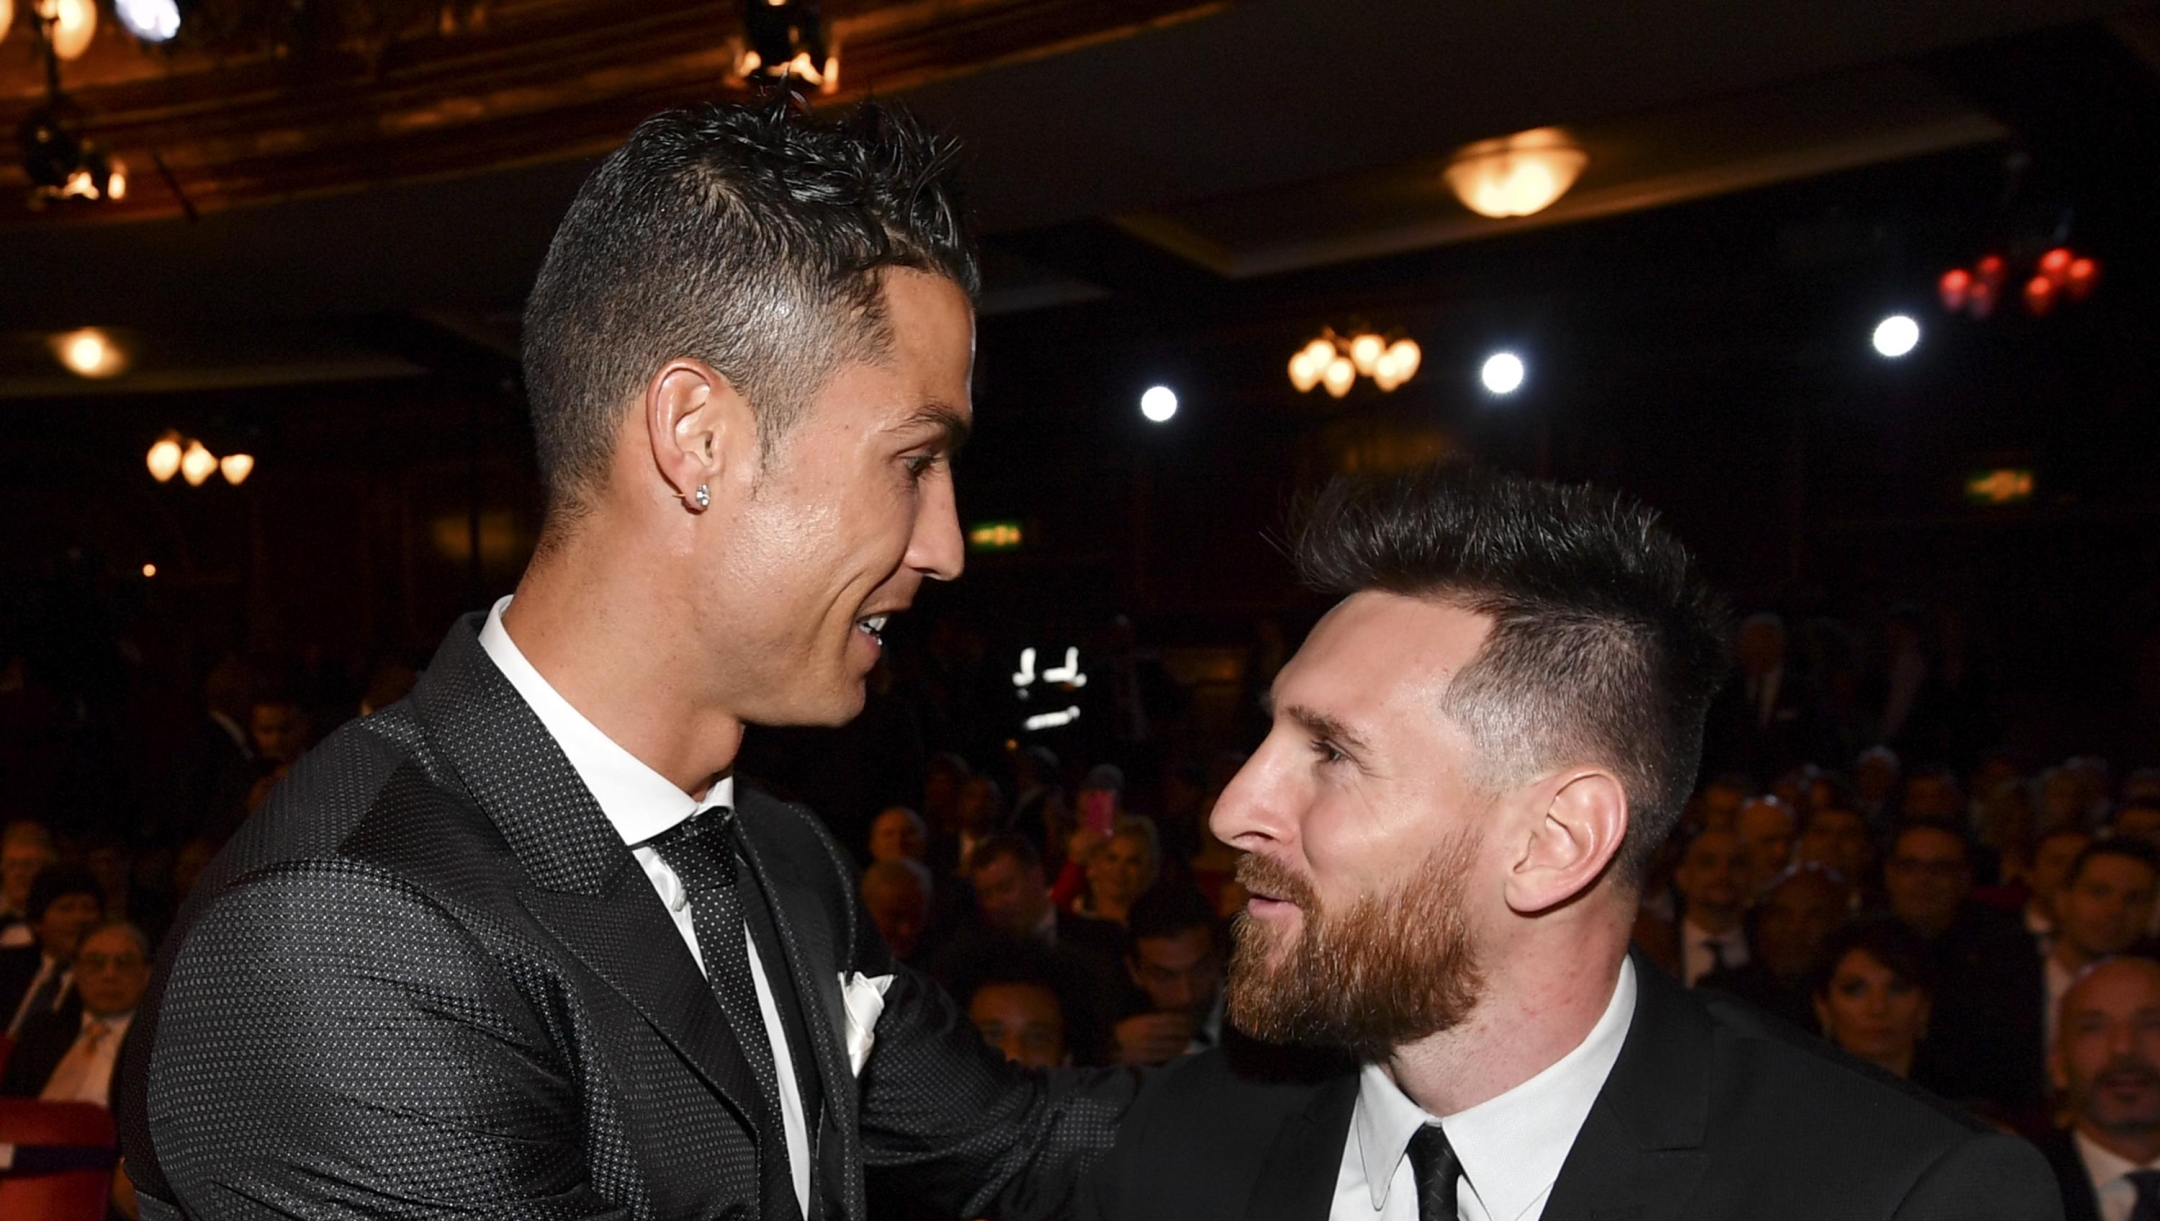 Nominees for the Best FIFA football player, Barcelona and Argentina forward Lionel Messi (R) and Real Madrid and Portugal forward Cristiano Ronaldo (L) chat before taking their seats for The Best FIFA Football Awards ceremony, on October 23, 2017 in London. (Photo by Ben STANSALL / AFP)